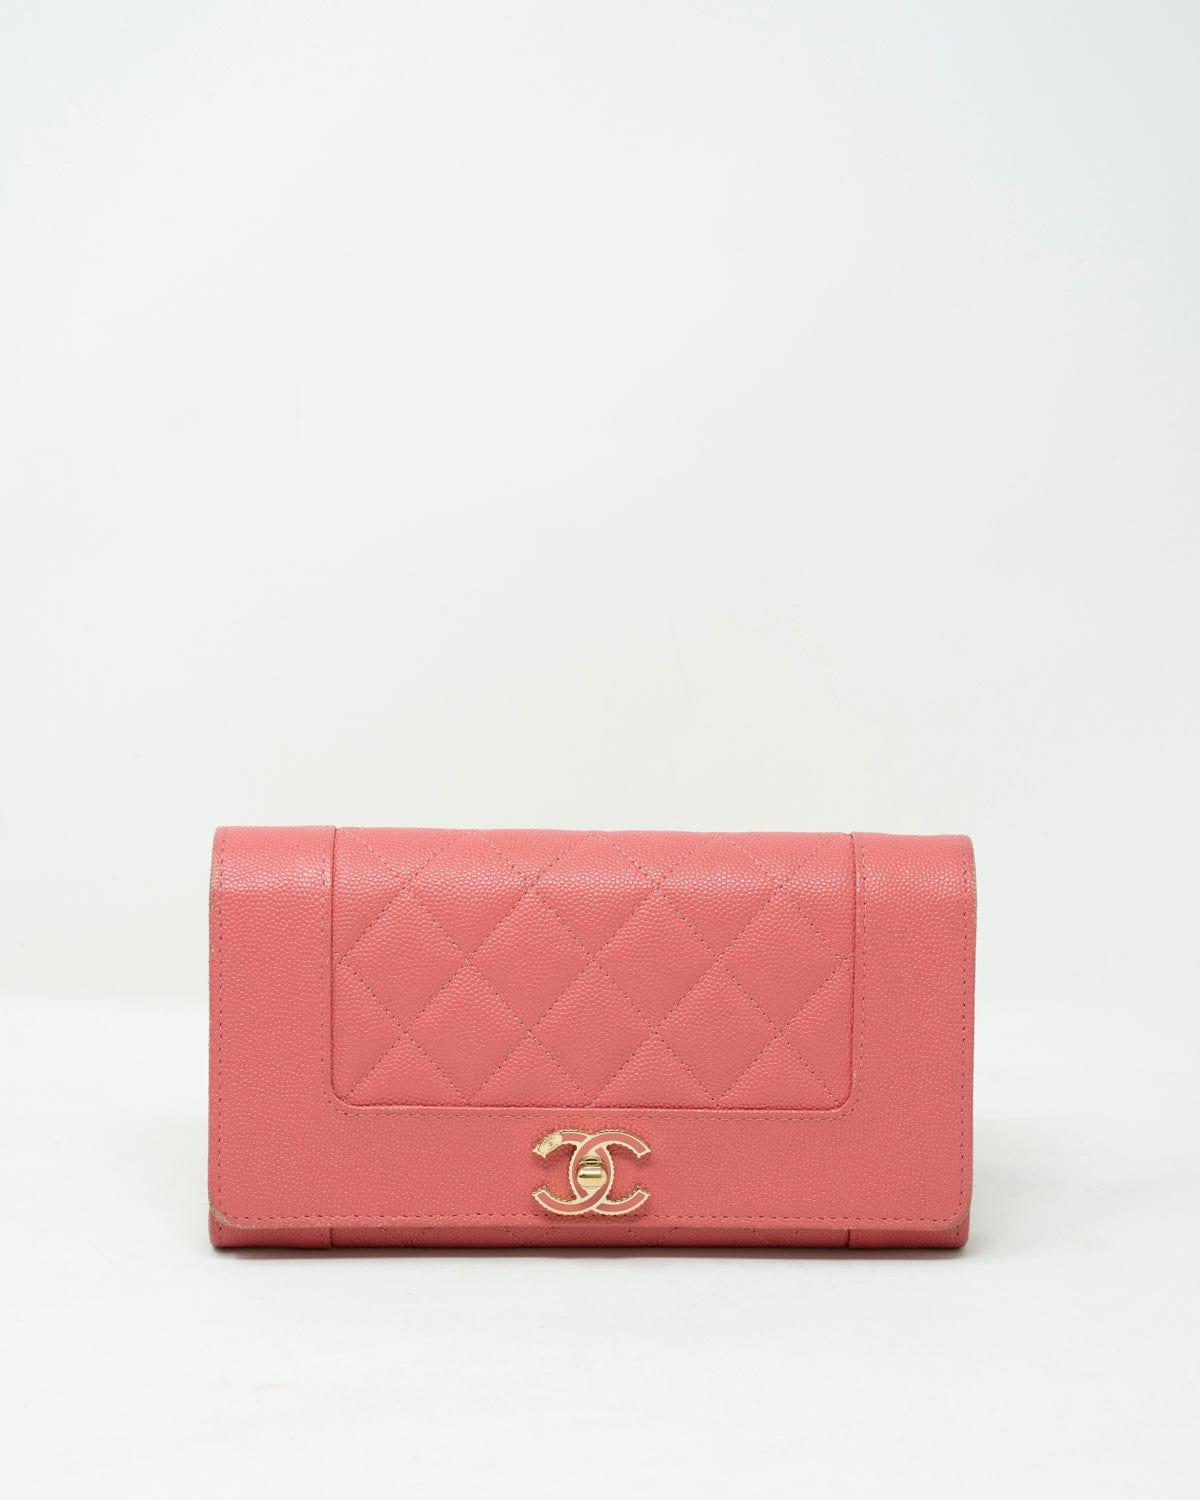 Chanel Chanel CC Mademoiselle Pink Caviar Skin Flap Wallet - AWL2329